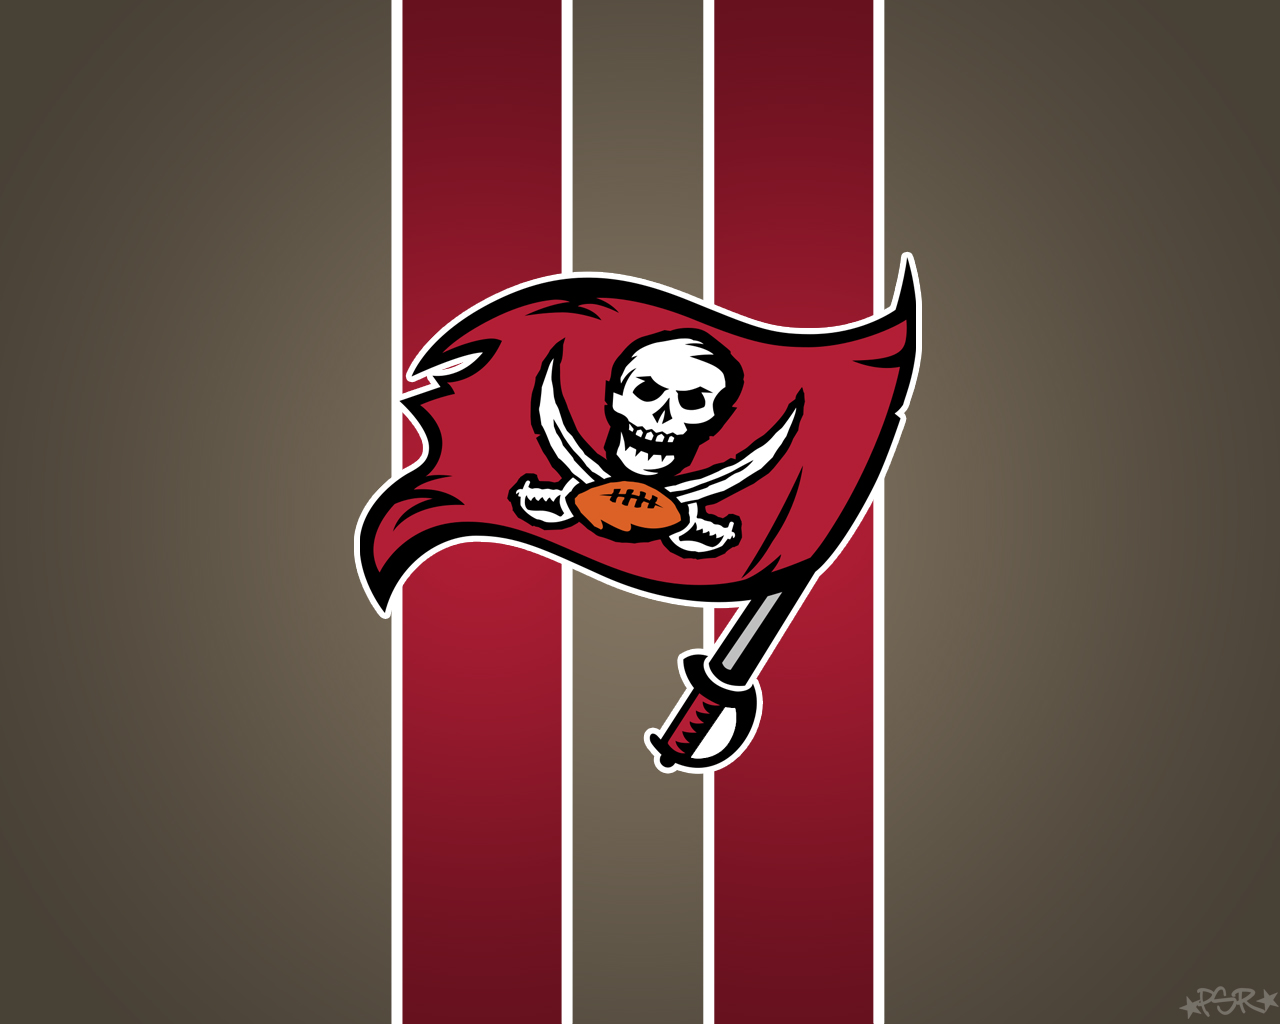 Bucs Logo with Stripes (by ~pasar3) | 1280 x 1024